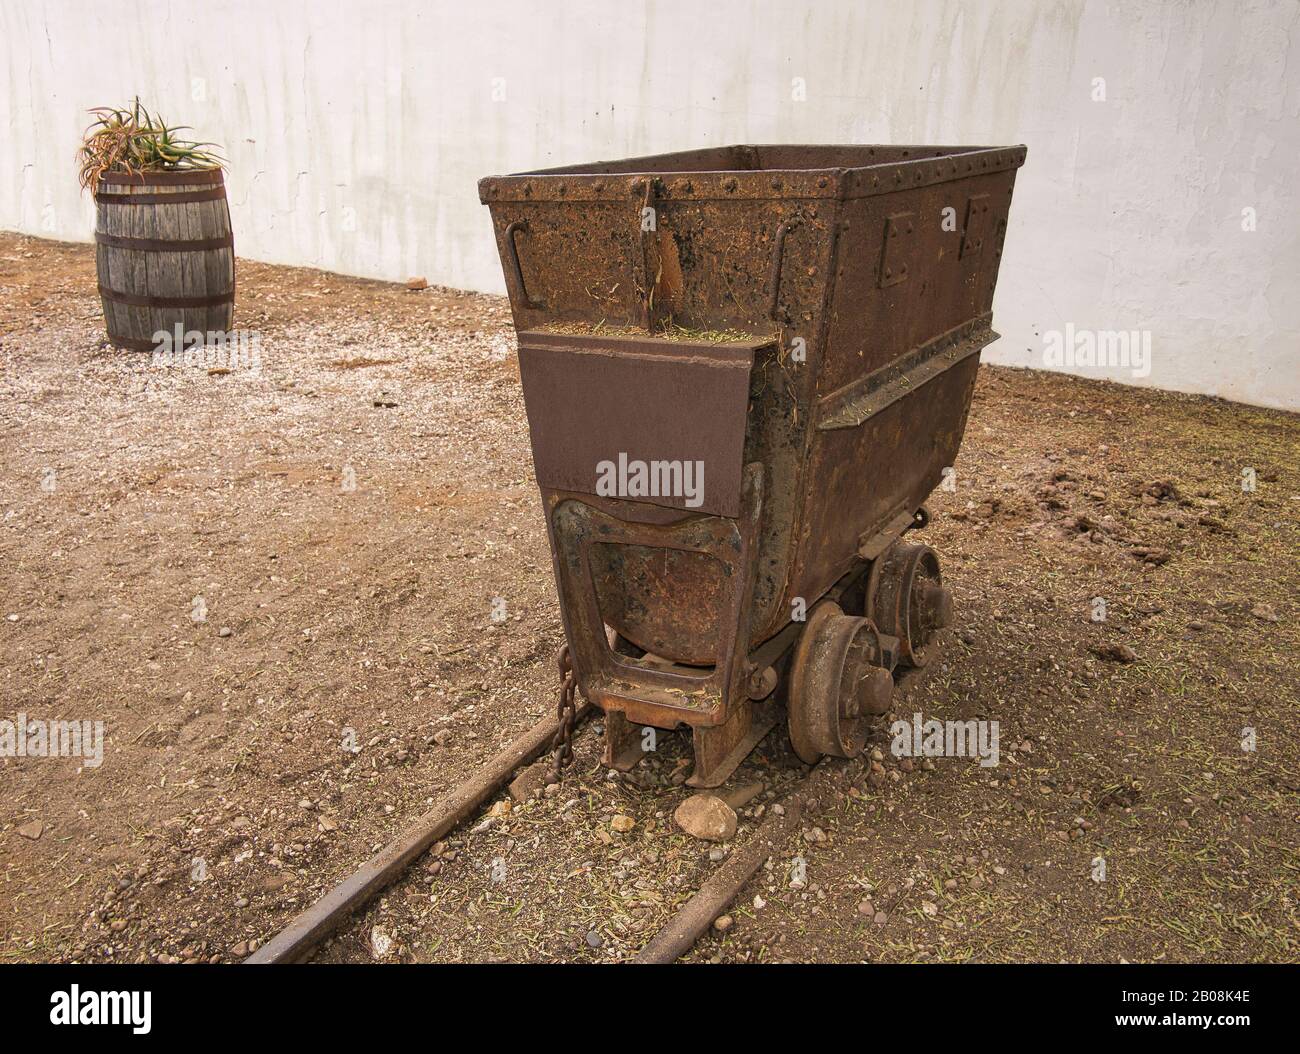 An old and rusty mining cart on rails as decoration in the garden Stock Photo